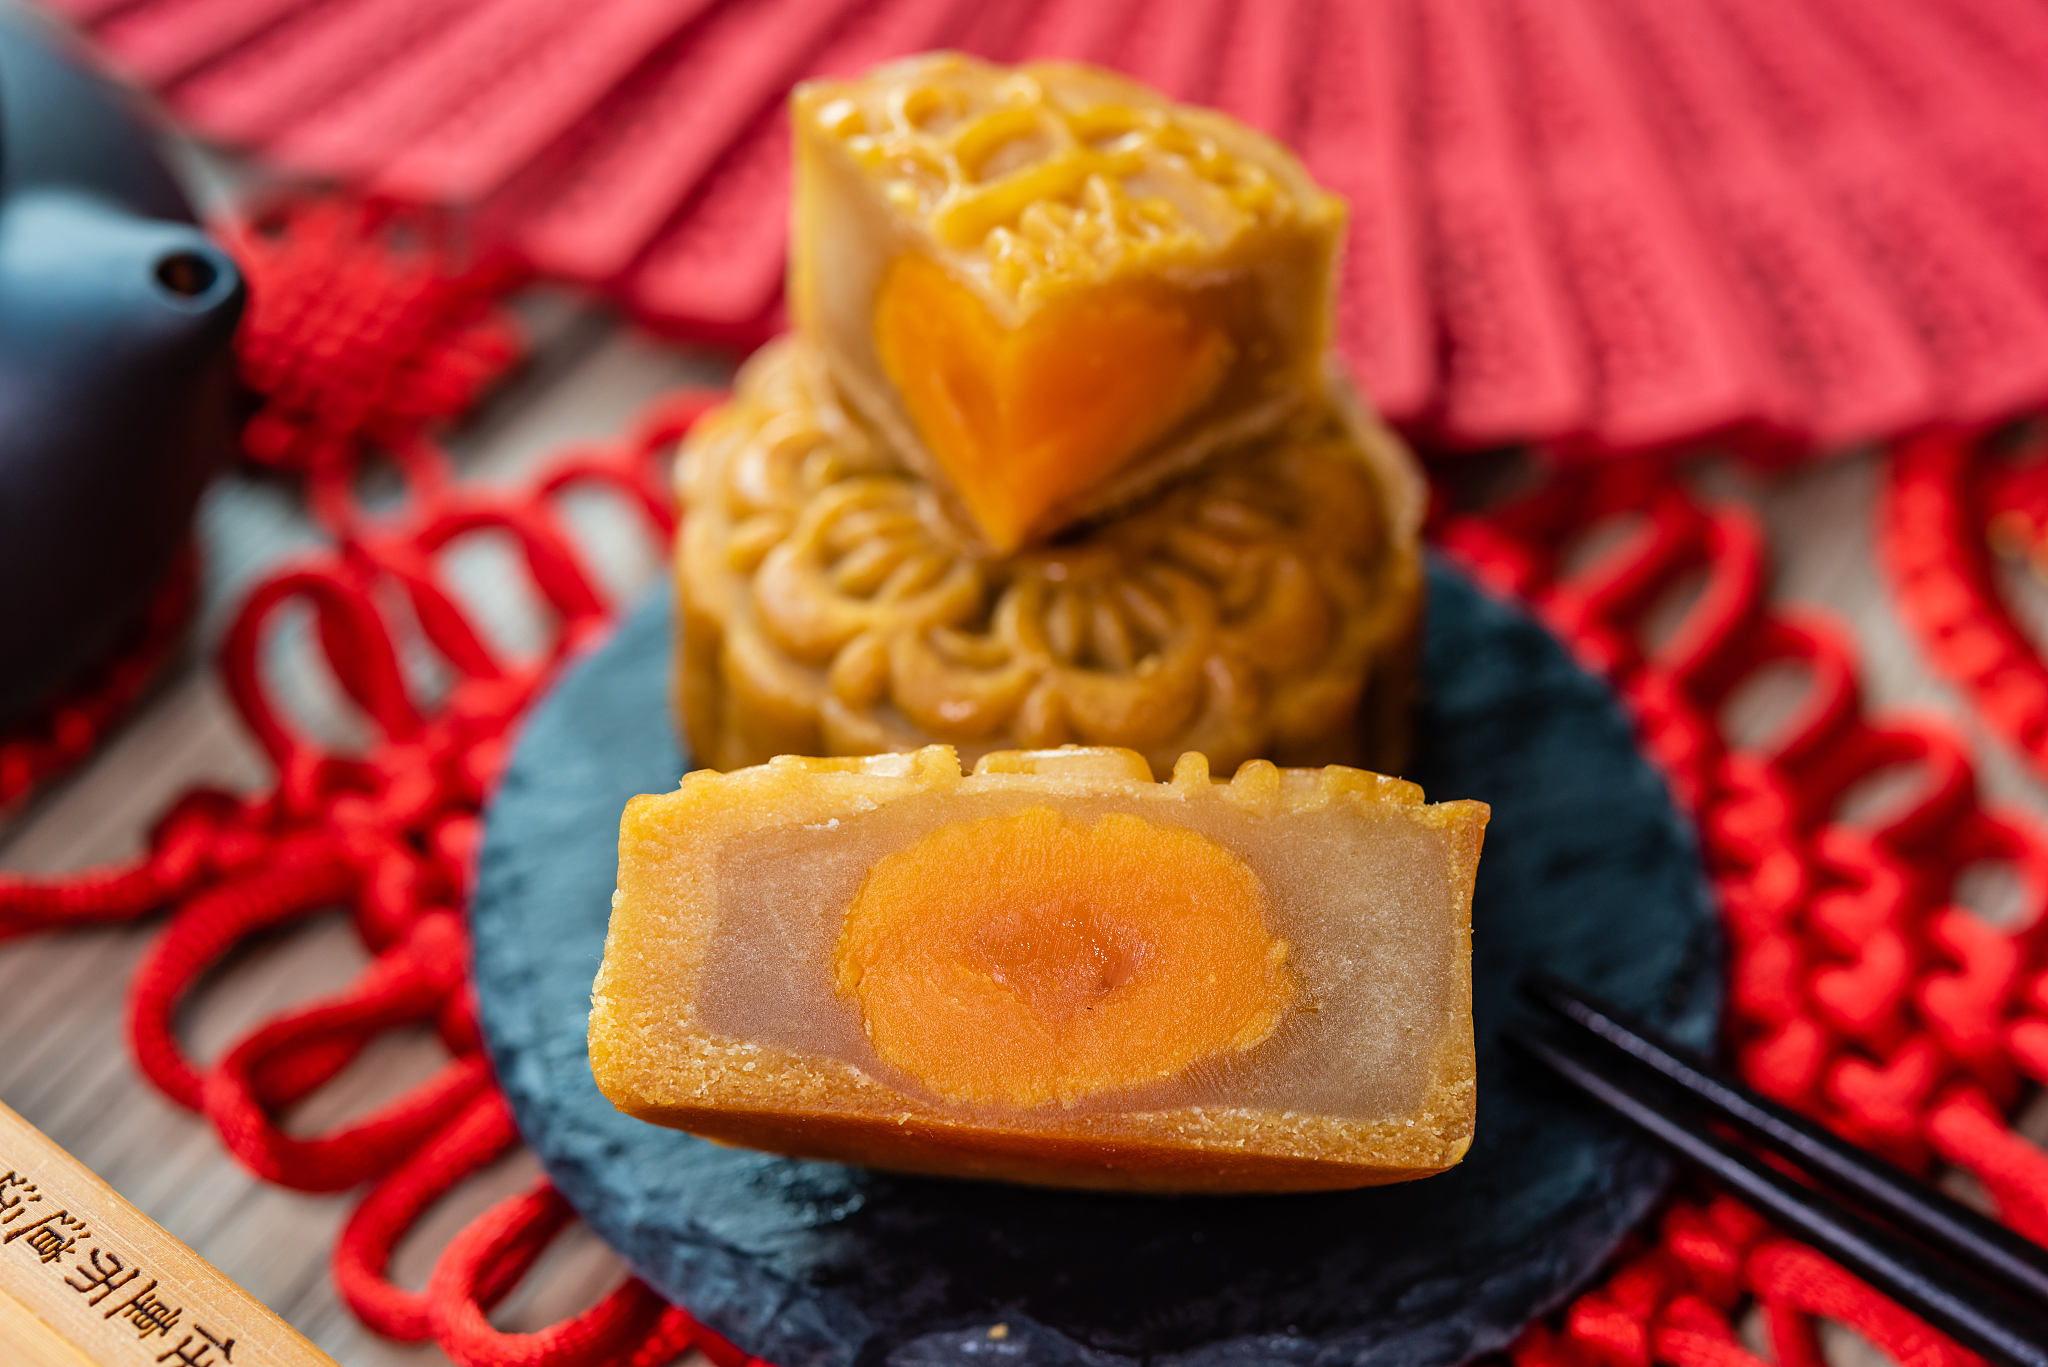 The most common type of mooncake is the Cantonese-style, known for its lotus-like shape and ornate embossed pattern on top. /CFP